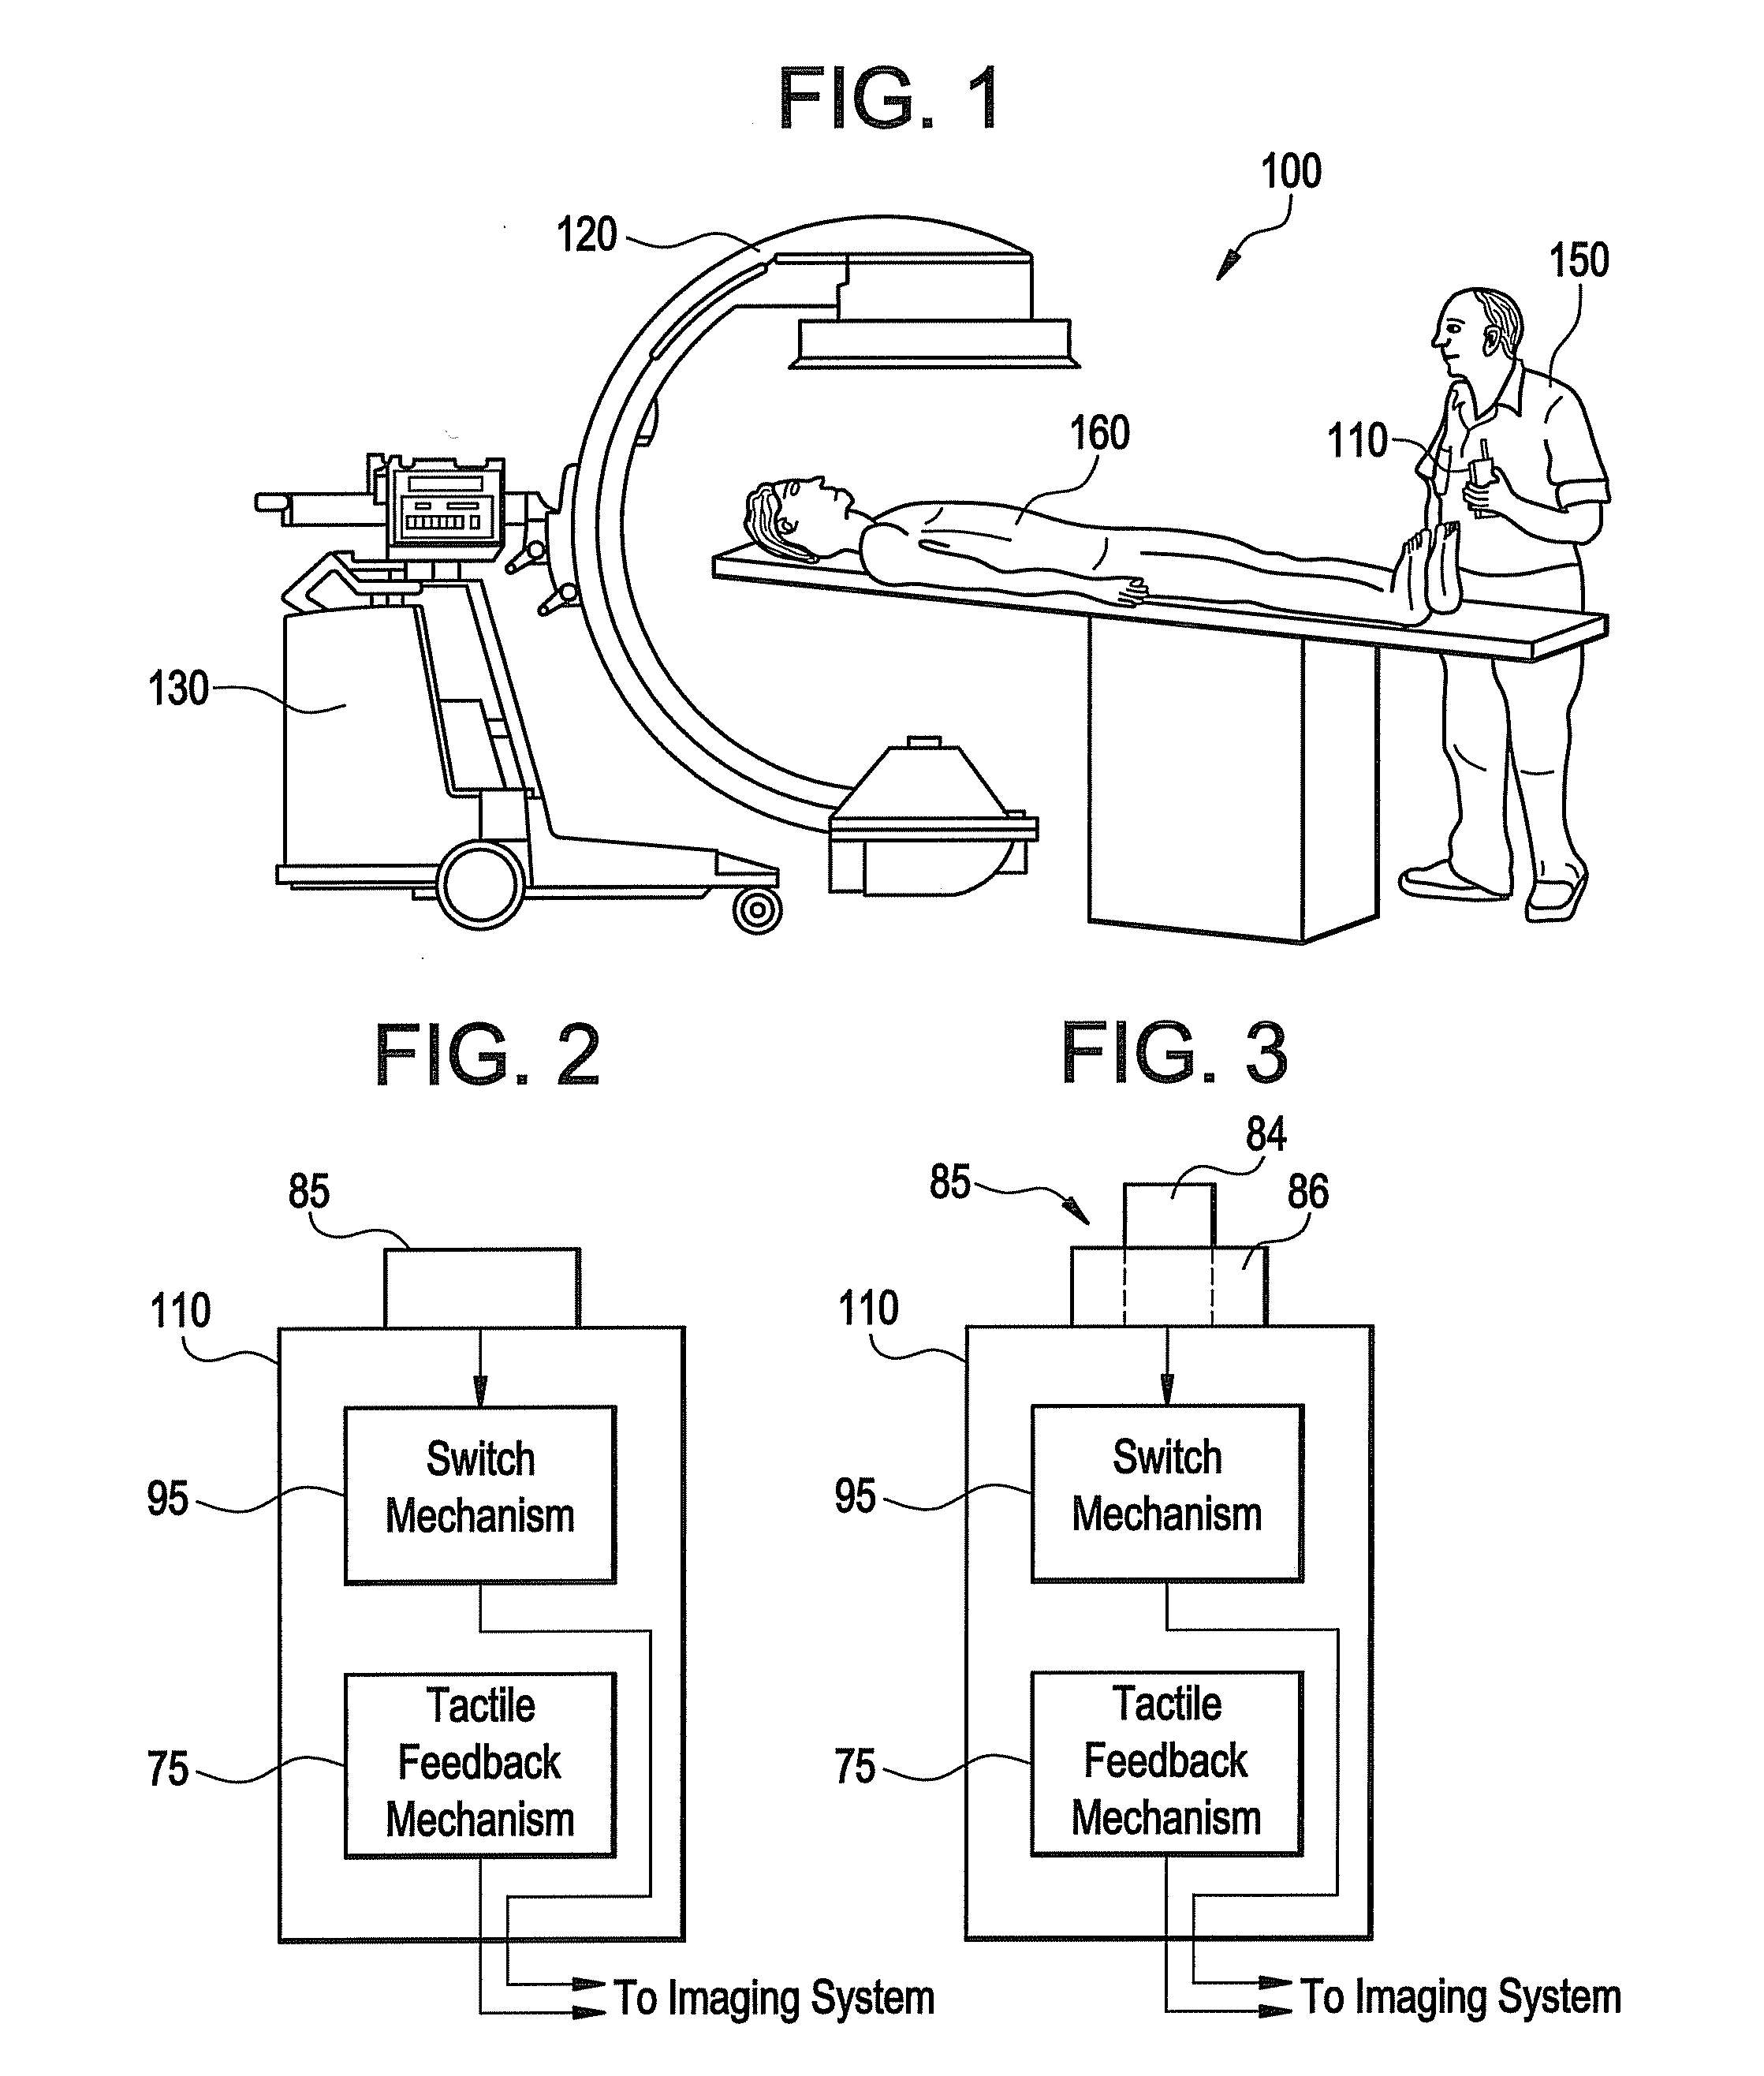 X-ray handswitch apparatus and system